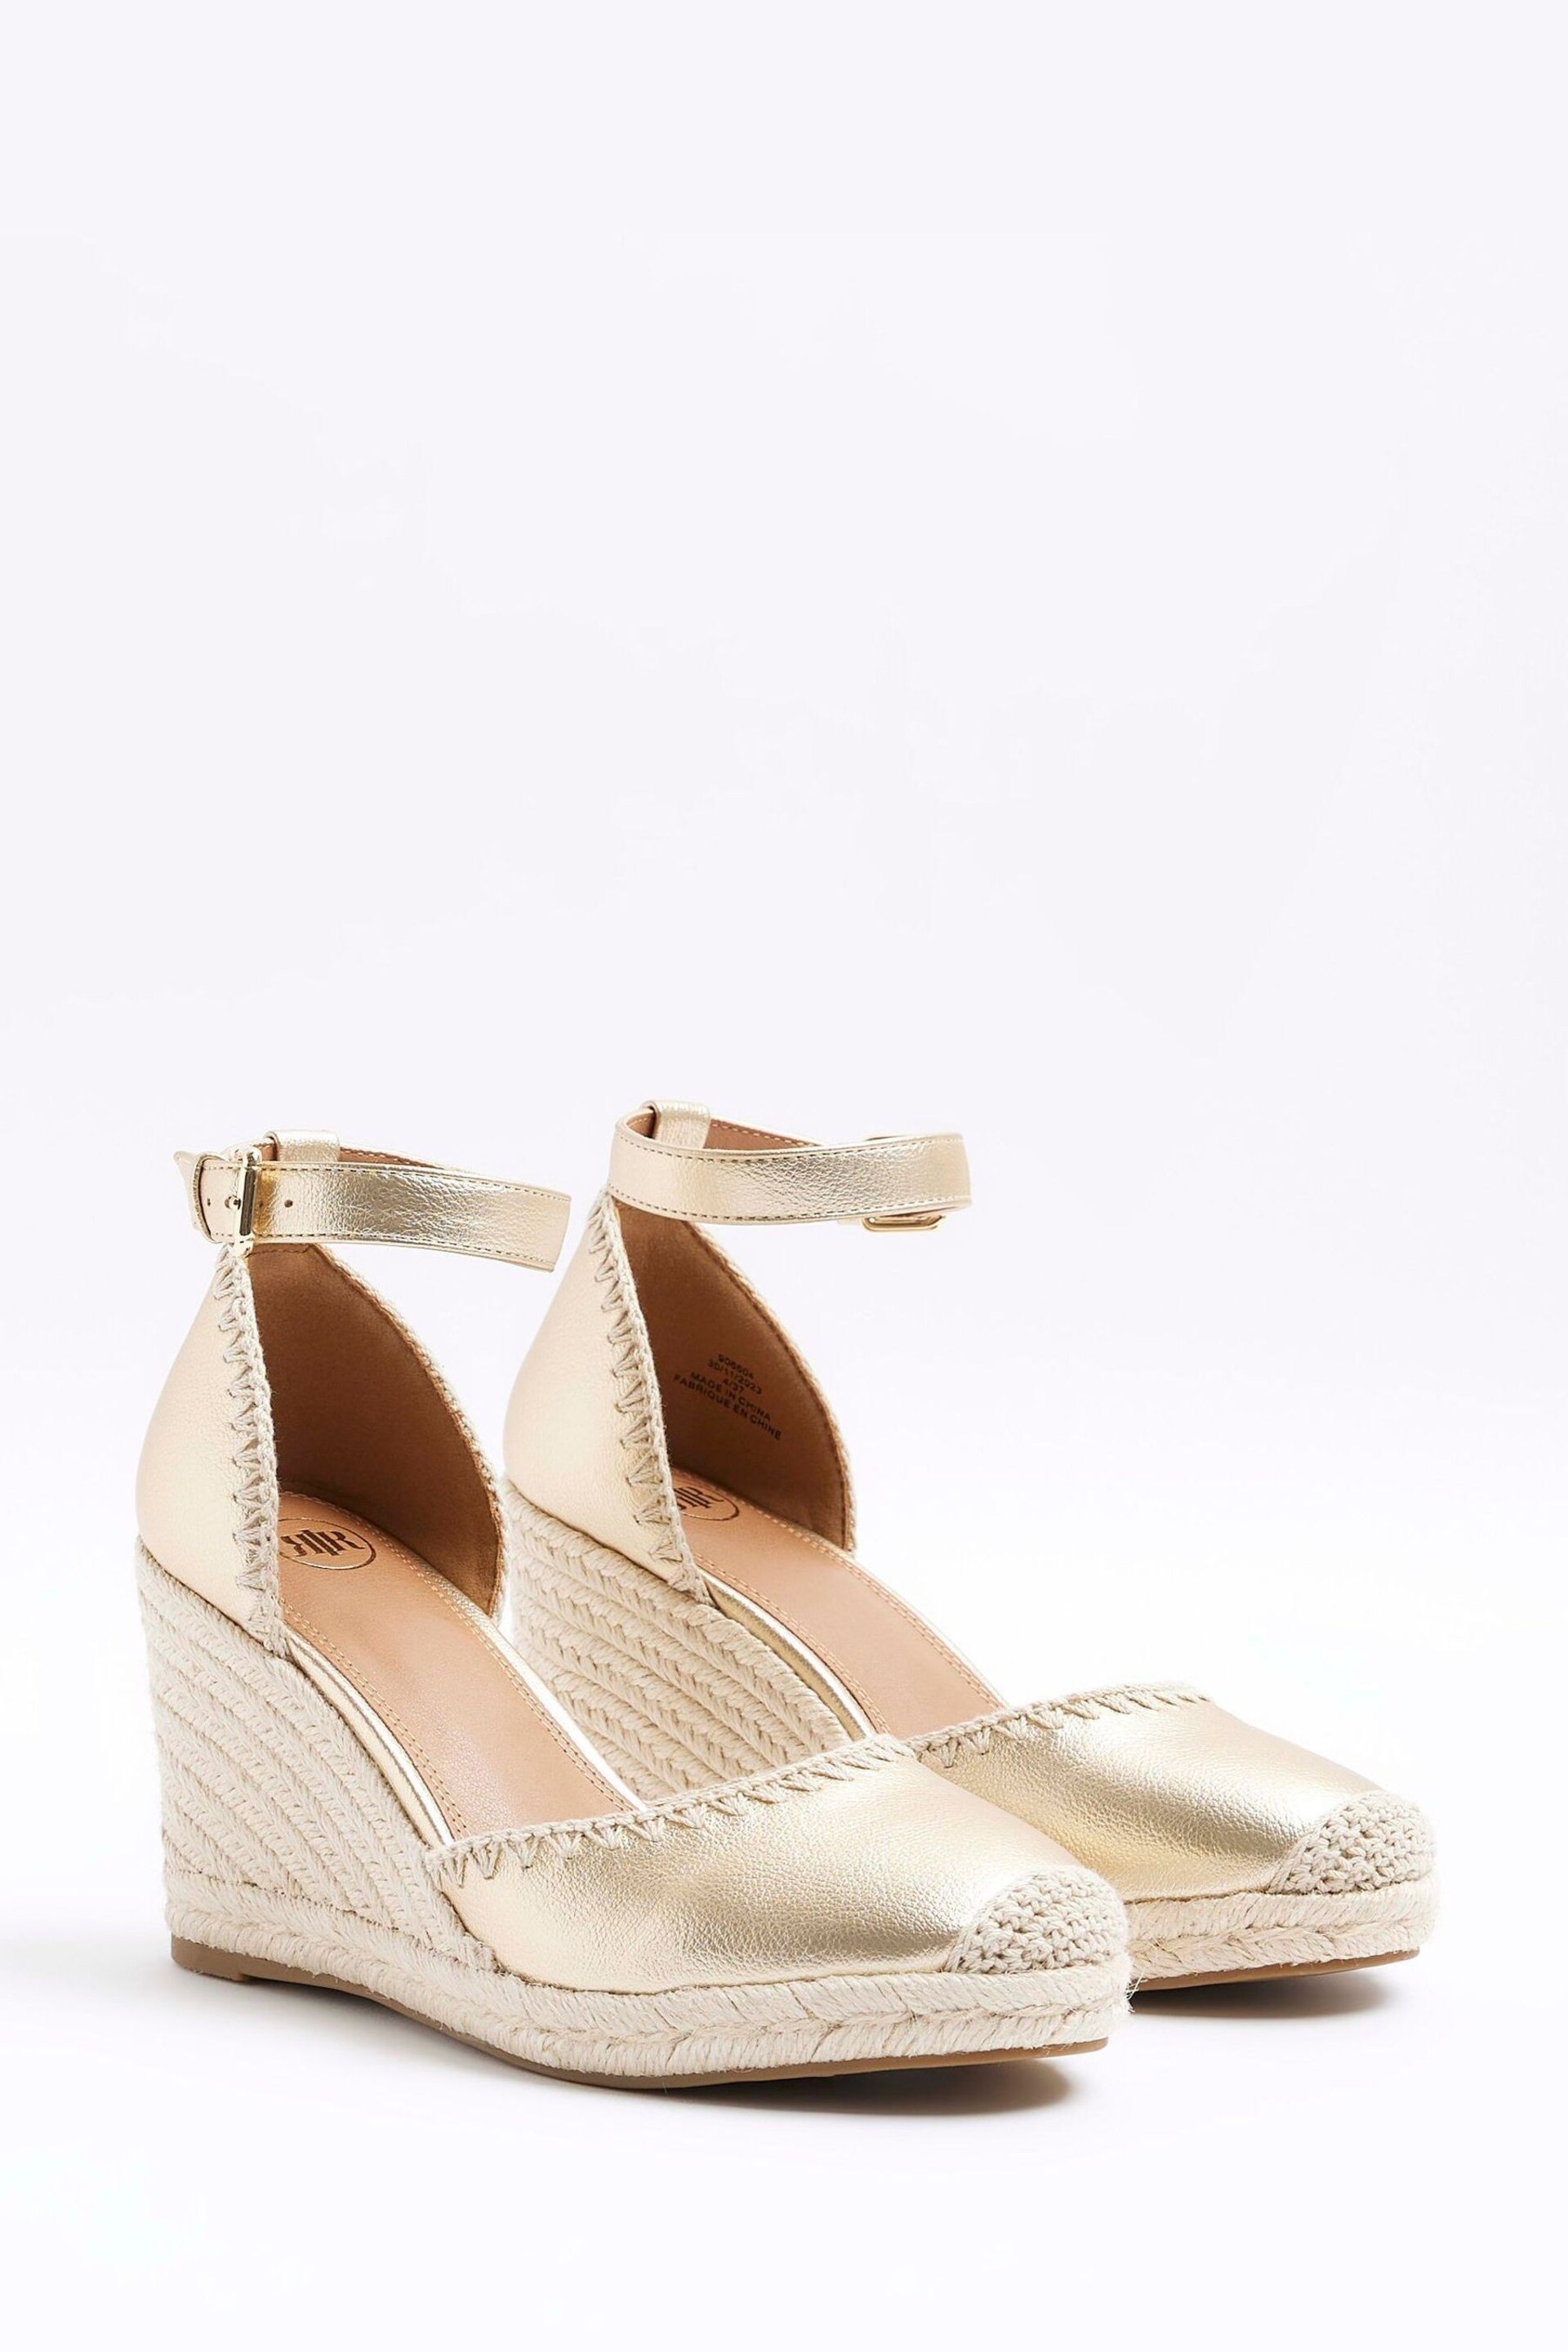 River Island Gold Espadrille Wedge Sandals - Image 4 of 5